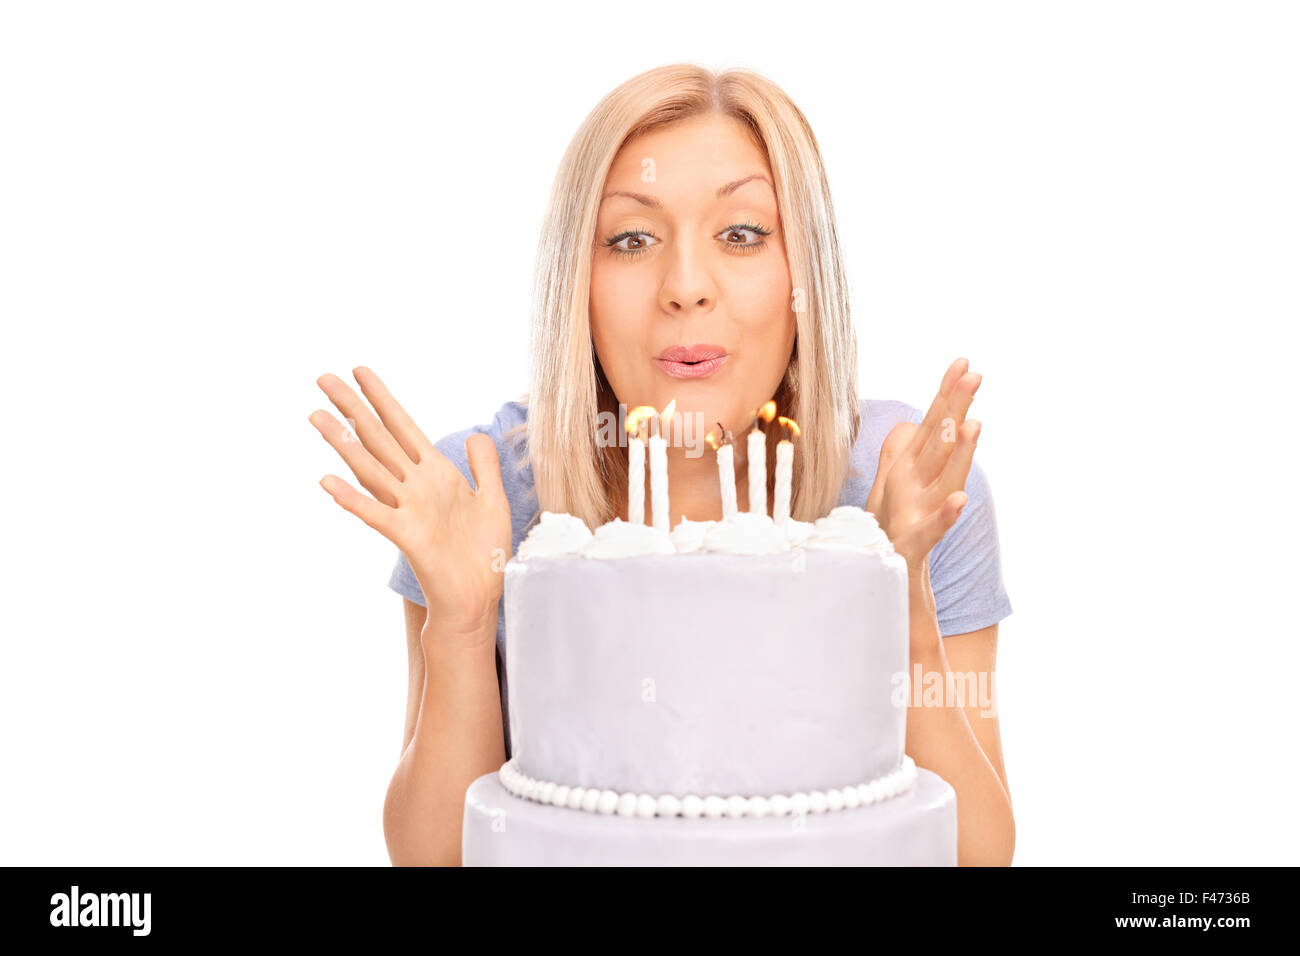 Studio shot of an overjoyed blond woman blowing candles on a birthday cake isolated on white background Stock Photo